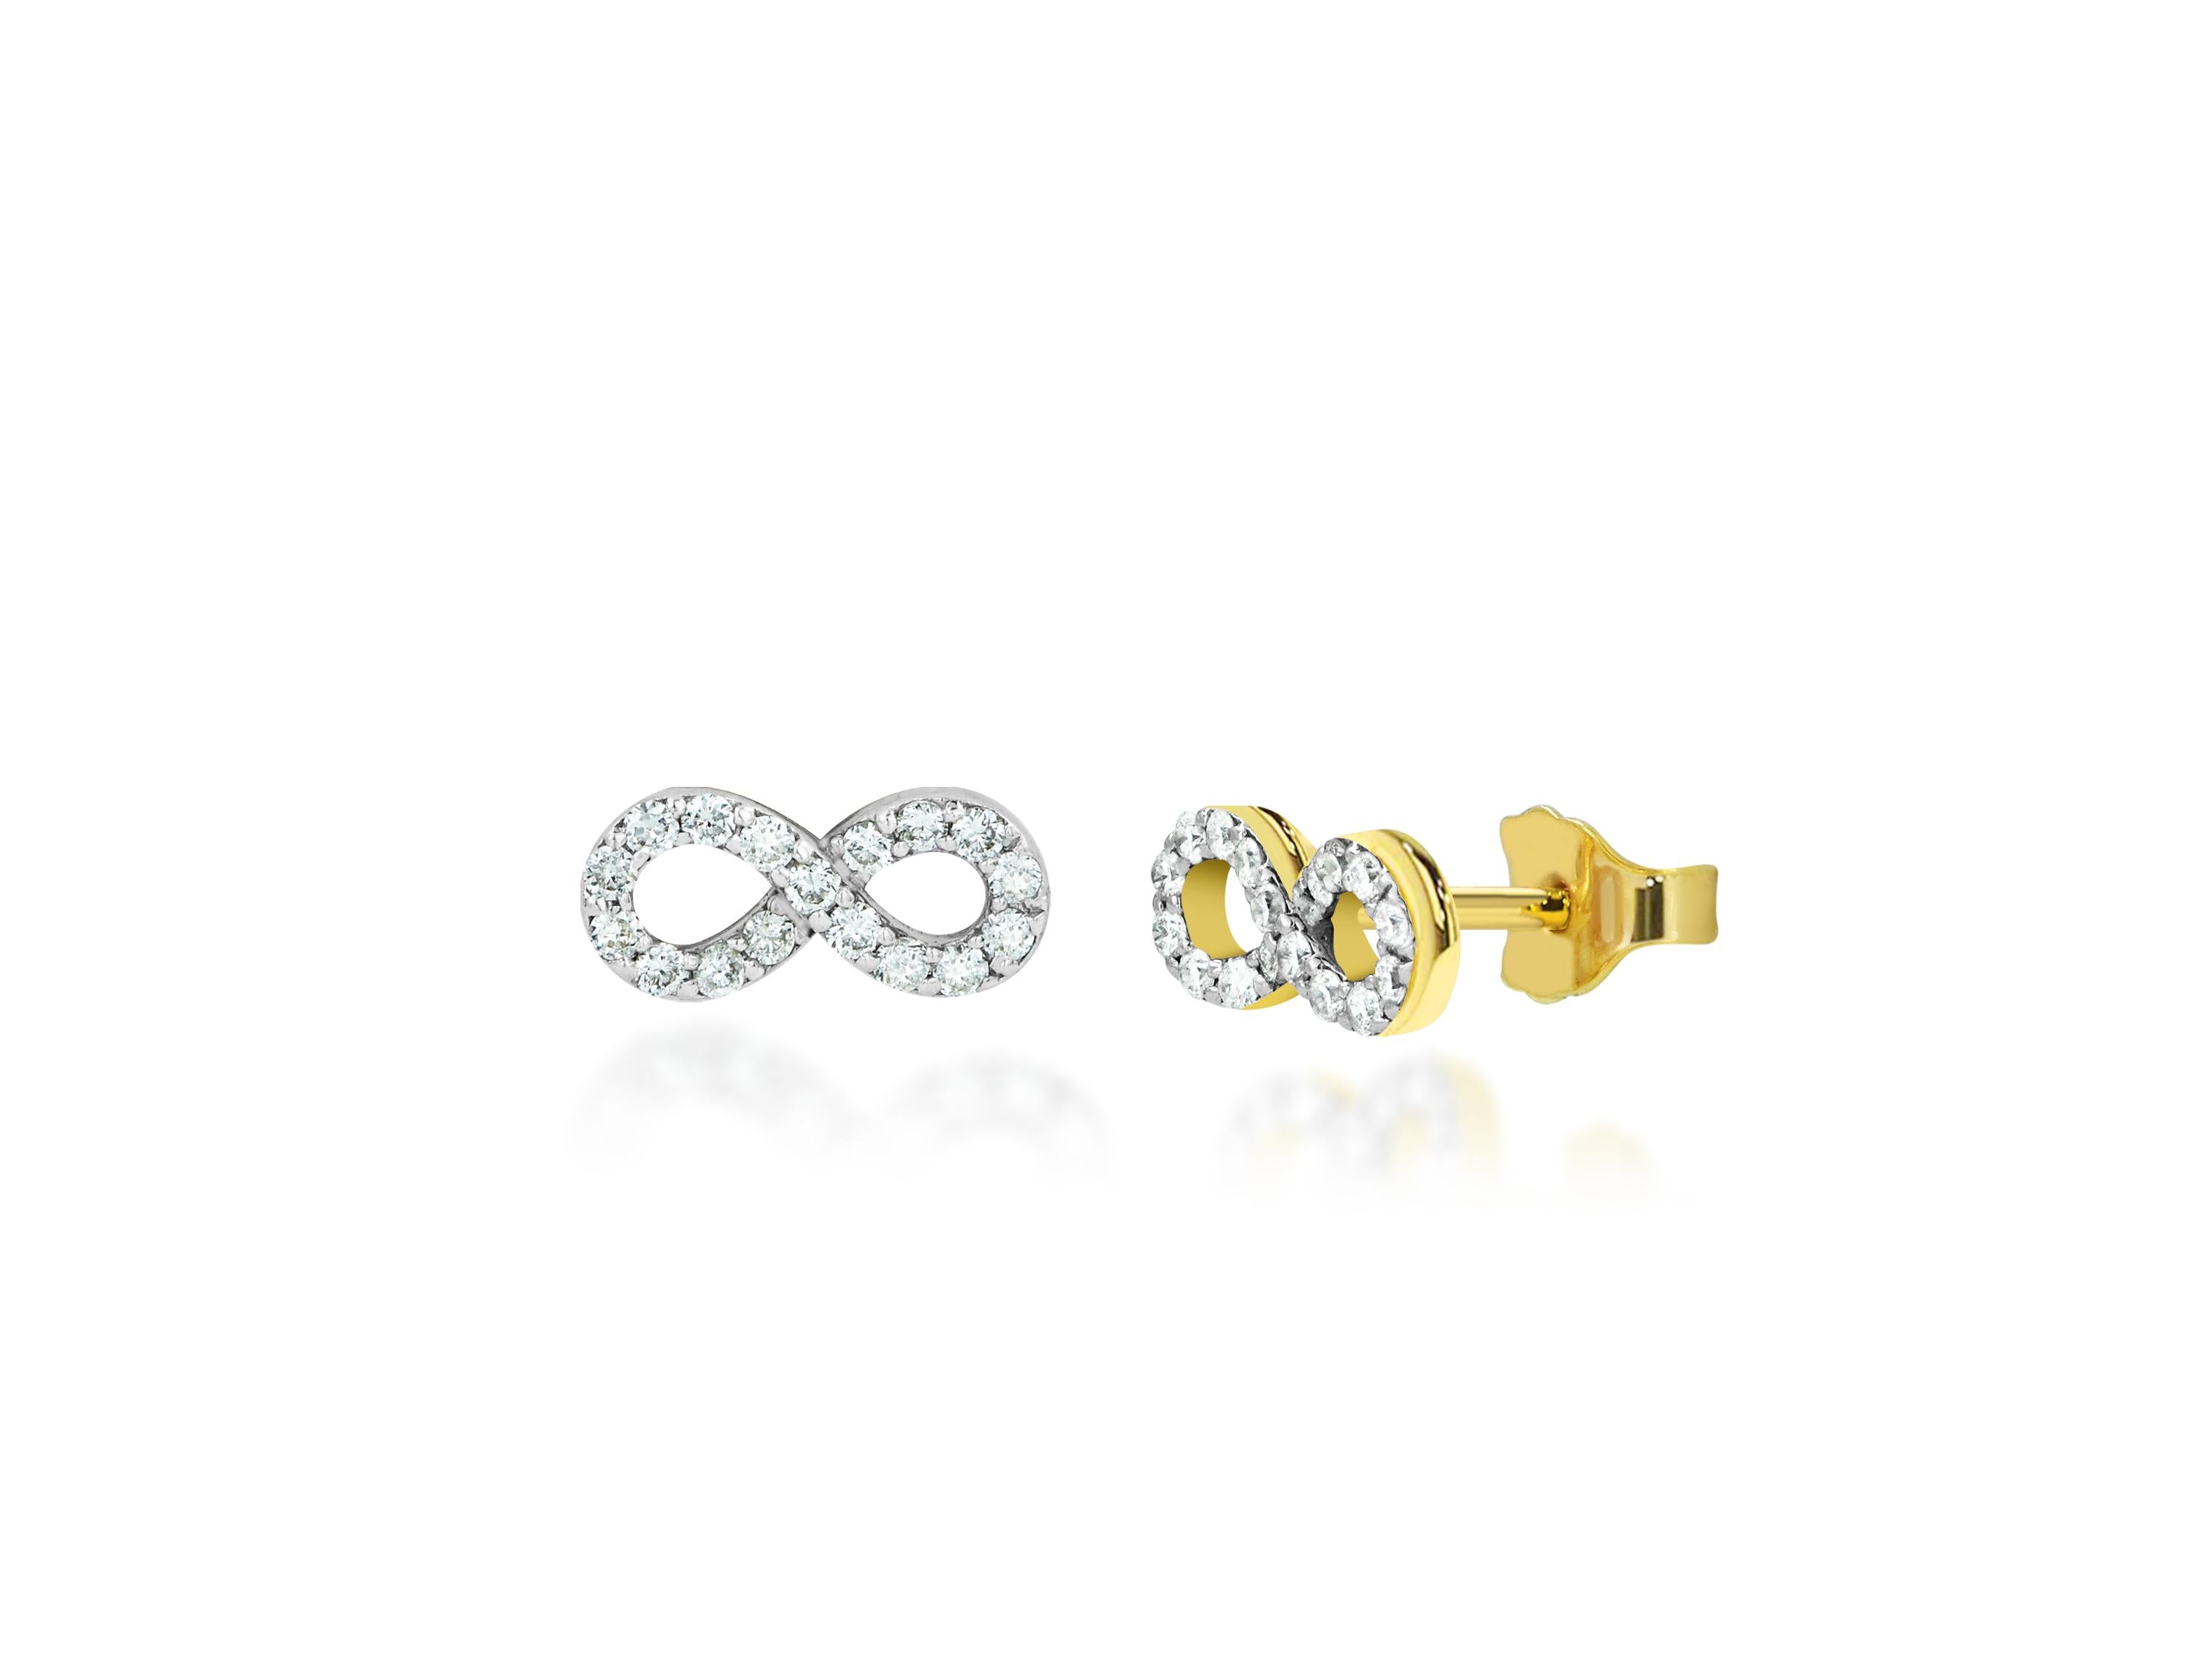 Diamond Infinity Stud Earrings are made of 18k solid gold.
Available in three colors of gold: White Gold / Rose Gold / Yellow Gold. 

These Dainty Infinity Stud Earrings are made of 18k Gold featuring shiny brilliant cut natural diamonds pave set by